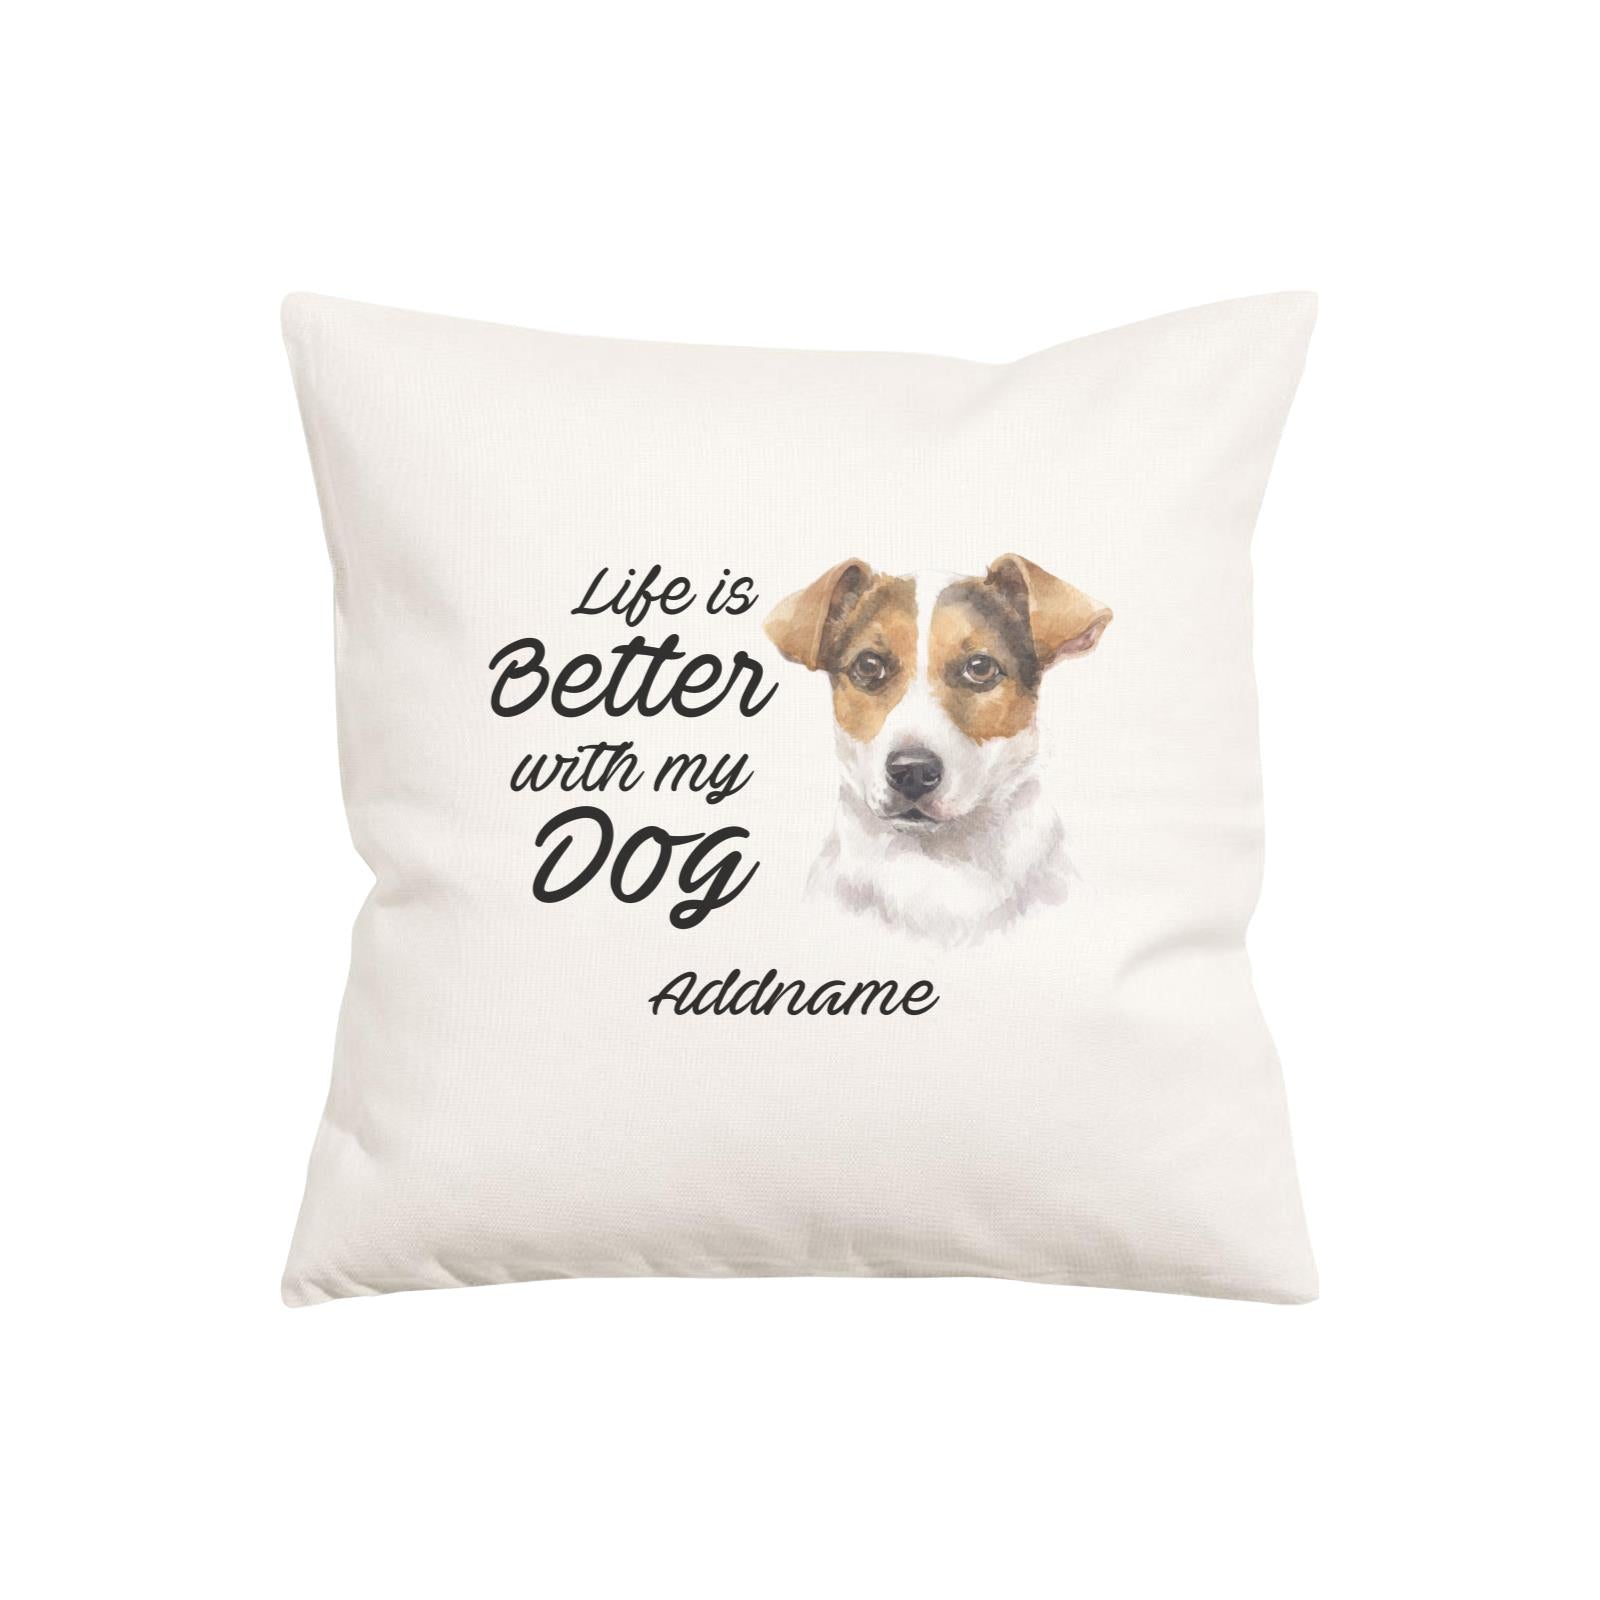 Watercolor Life is Better With My Dog Jack Russell Short Hair Addname Pillow Cushion